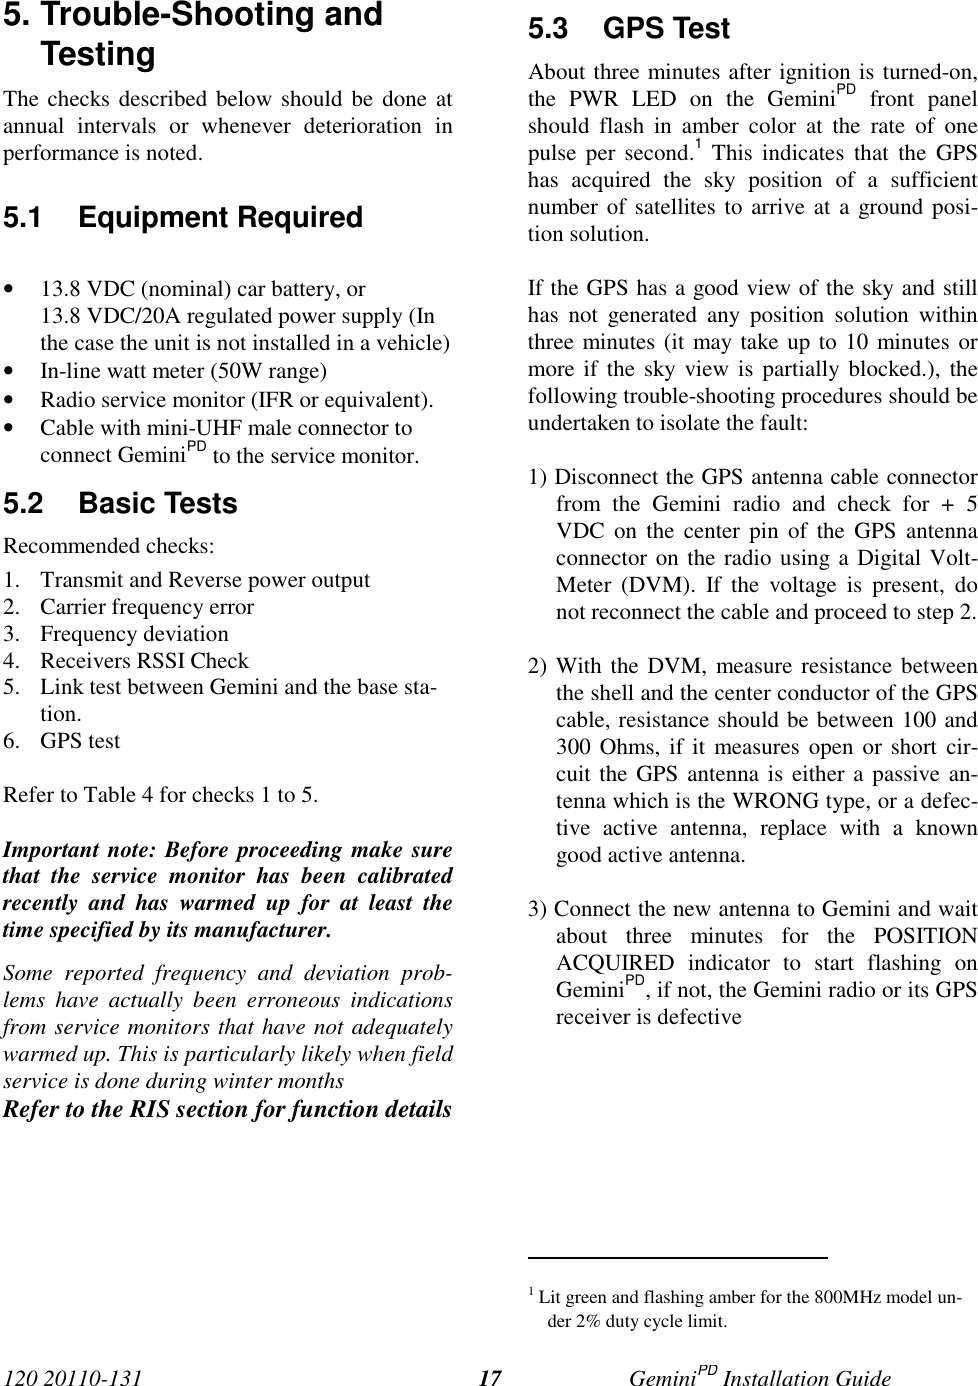 120 20110-131 GeminiPD Installation Guide175. Trouble-Shooting andTestingThe checks described below should be done atannual intervals or whenever deterioration inperformance is noted.5.1 Equipment Required• 13.8 VDC (nominal) car battery, or13.8 VDC/20A regulated power supply (Inthe case the unit is not installed in a vehicle)• In-line watt meter (50W range)• Radio service monitor (IFR or equivalent).• Cable with mini-UHF male connector toconnect GeminiPD to the service monitor.5.2 Basic TestsRecommended checks:1. Transmit and Reverse power output2. Carrier frequency error3. Frequency deviation4. Receivers RSSI Check5. Link test between Gemini and the base sta-tion.6. GPS testRefer to Table 4 for checks 1 to 5.Important note: Before proceeding make surethat the service monitor has been calibratedrecently and has warmed up for at least thetime specified by its manufacturer.Some reported frequency and deviation prob-lems have actually been erroneous indicationsfrom service monitors that have not adequatelywarmed up. This is particularly likely when fieldservice is done during winter monthsRefer to the RIS section for function details5.3 GPS TestAbout three minutes after ignition is turned-on,the PWR LED on the GeminiPD front panelshould flash in amber color at the rate of onepulse per second.1 This indicates that the GPShas acquired the sky position of a sufficientnumber of satellites to arrive at a ground posi-tion solution.If the GPS has a good view of the sky and stillhas not generated any position solution withinthree minutes (it may take up to 10 minutes ormore if the sky view is partially blocked.), thefollowing trouble-shooting procedures should beundertaken to isolate the fault:1) Disconnect the GPS antenna cable connectorfrom the Gemini radio and check for + 5VDC on the center pin of the GPS antennaconnector on the radio using a Digital Volt-Meter (DVM). If the voltage is present, donot reconnect the cable and proceed to step 2.2) With the DVM, measure resistance betweenthe shell and the center conductor of the GPScable, resistance should be between 100 and300 Ohms, if it measures open or short cir-cuit the GPS antenna is either a passive an-tenna which is the WRONG type, or a defec-tive active antenna, replace with a knowngood active antenna.3) Connect the new antenna to Gemini and waitabout three minutes for the POSITIONACQUIRED indicator to start flashing onGeminiPD, if not, the Gemini radio or its GPSreceiver is defective                                                     1 Lit green and flashing amber for the 800MHz model un-der 2% duty cycle limit.